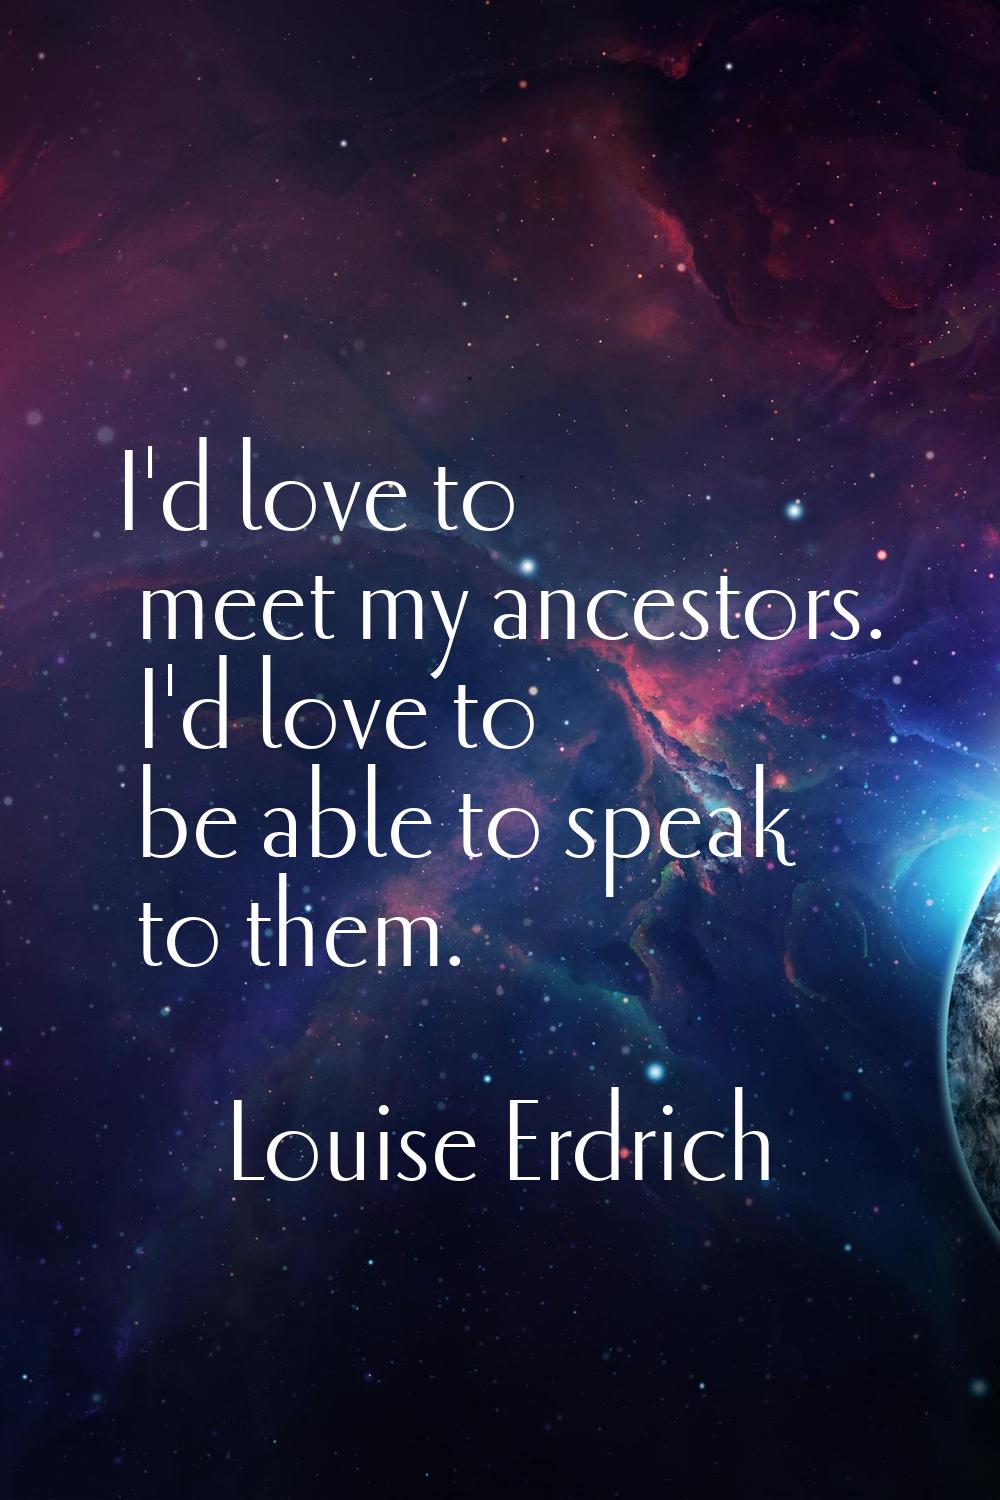 I'd love to meet my ancestors. I'd love to be able to speak to them.